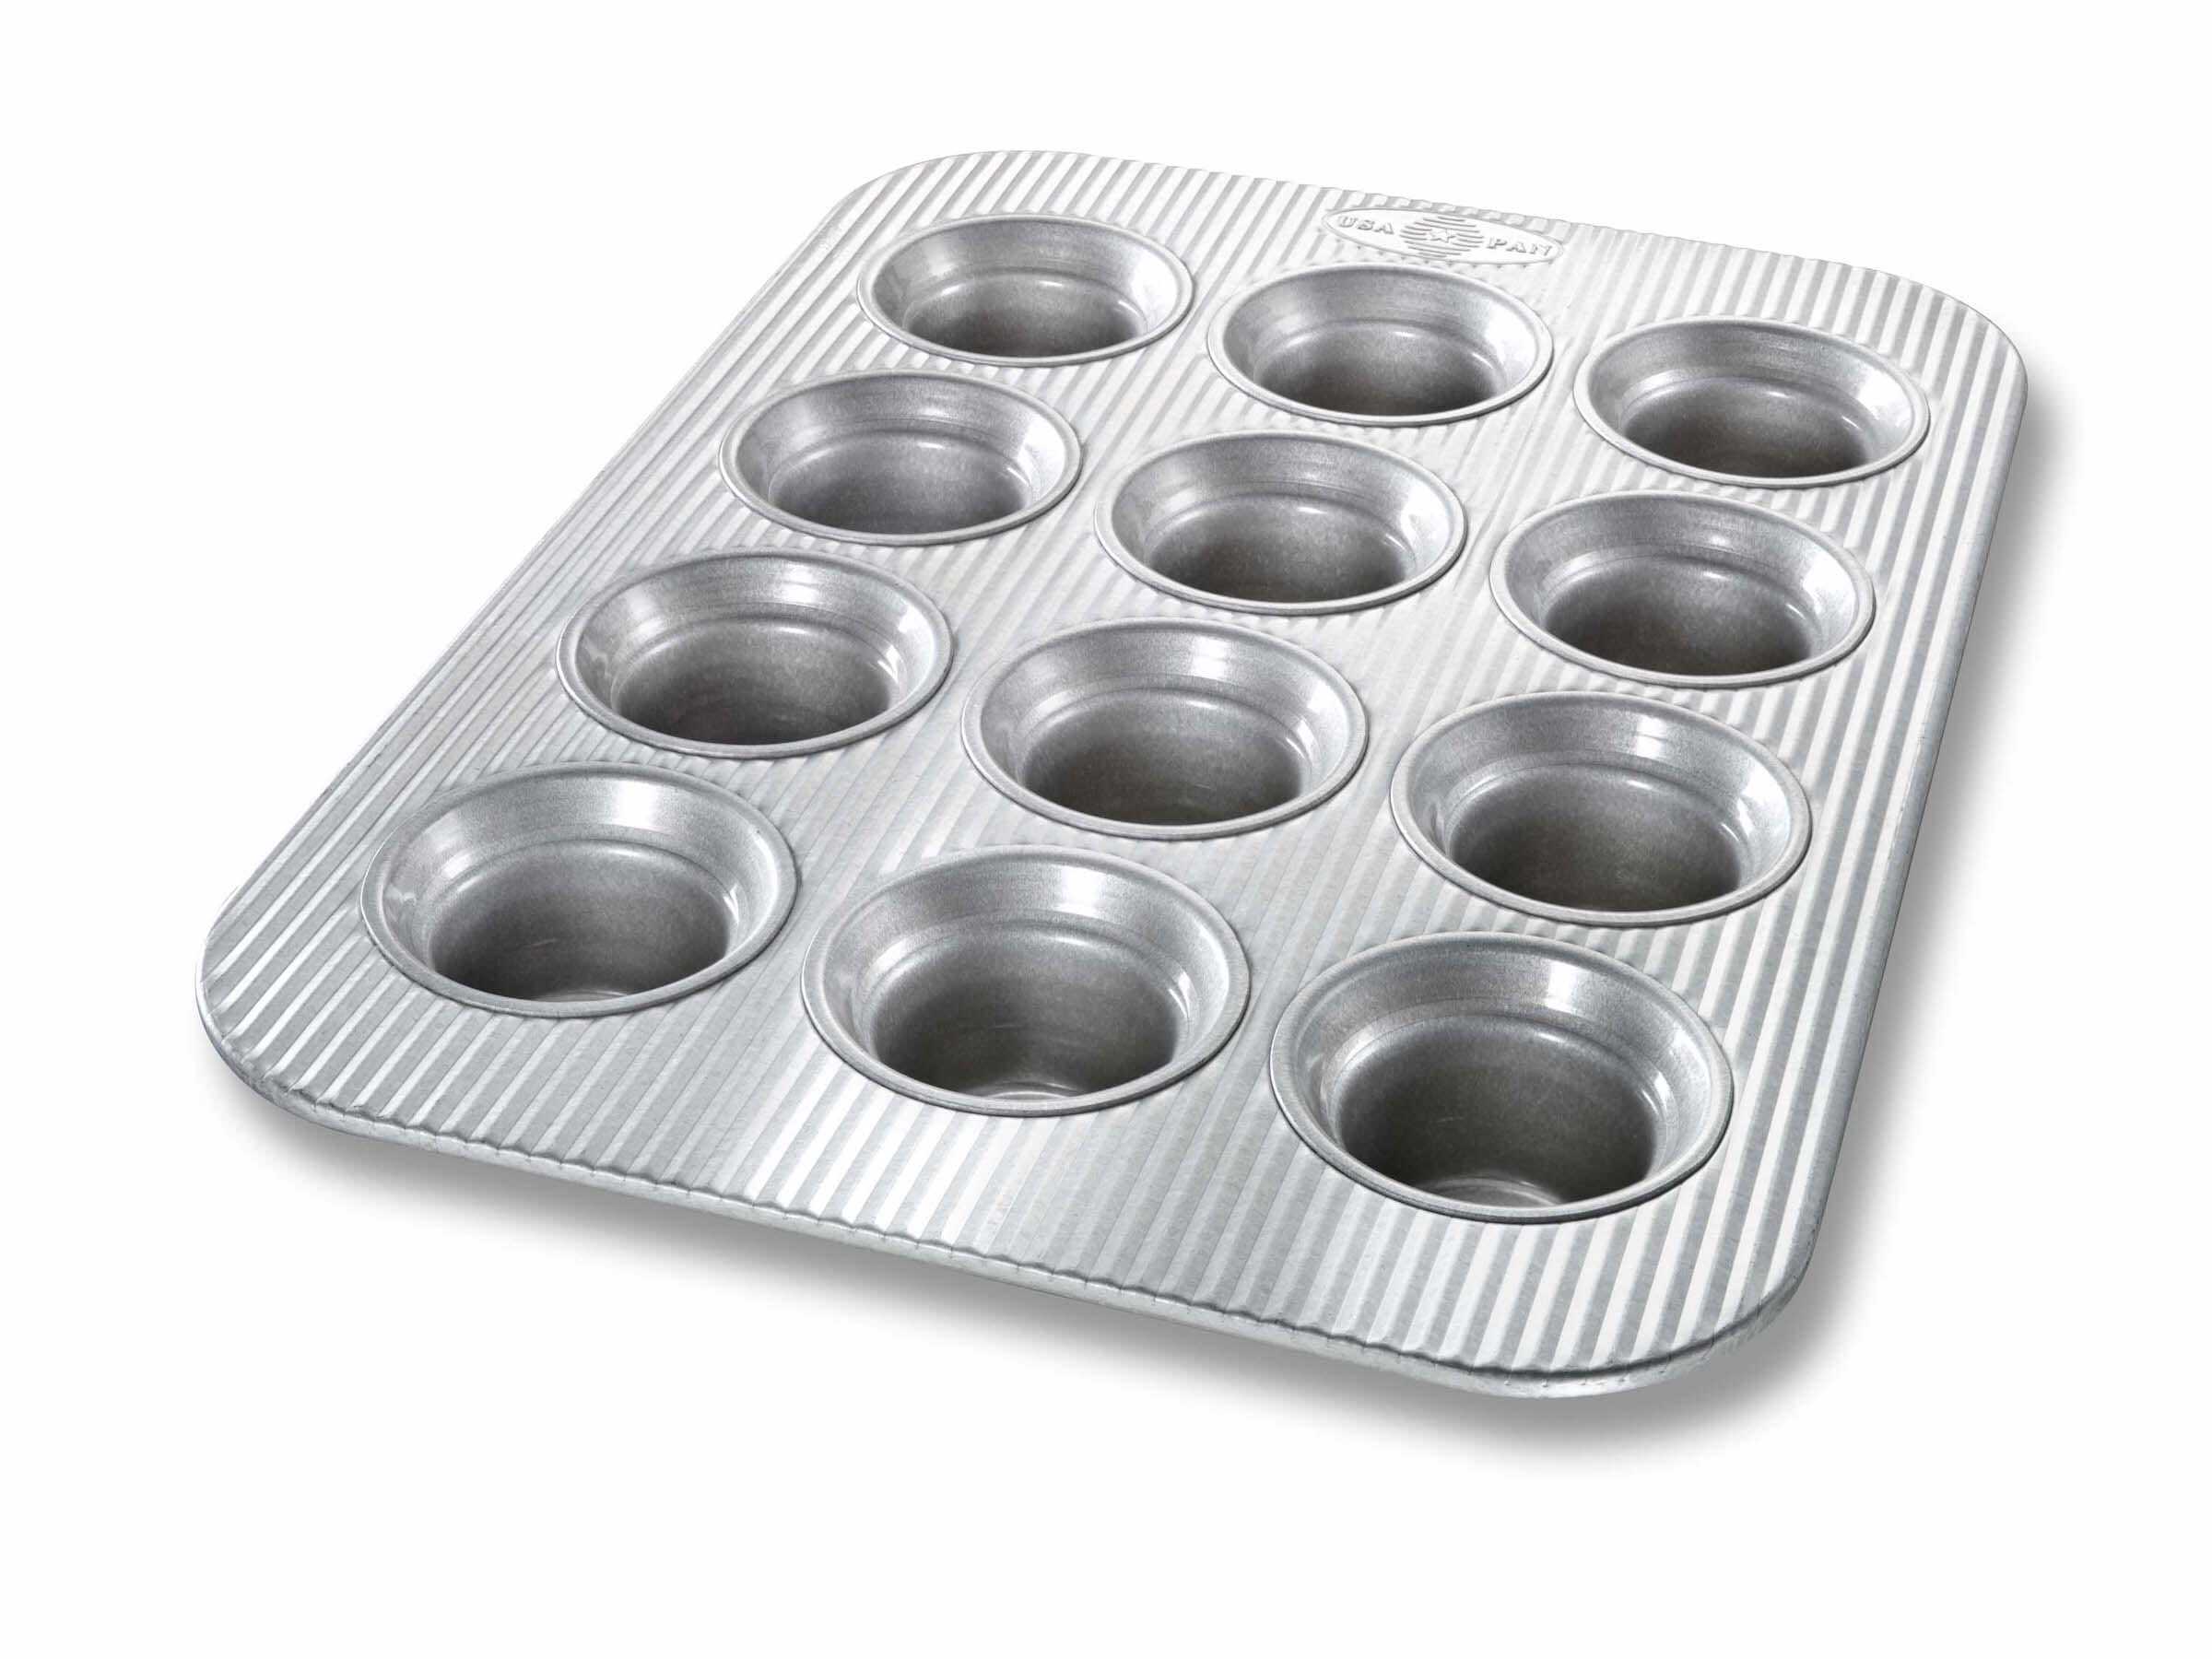 LOCKIN GROUP 12 CUP MUFFIN PAN AND LID SET - 501 Faire